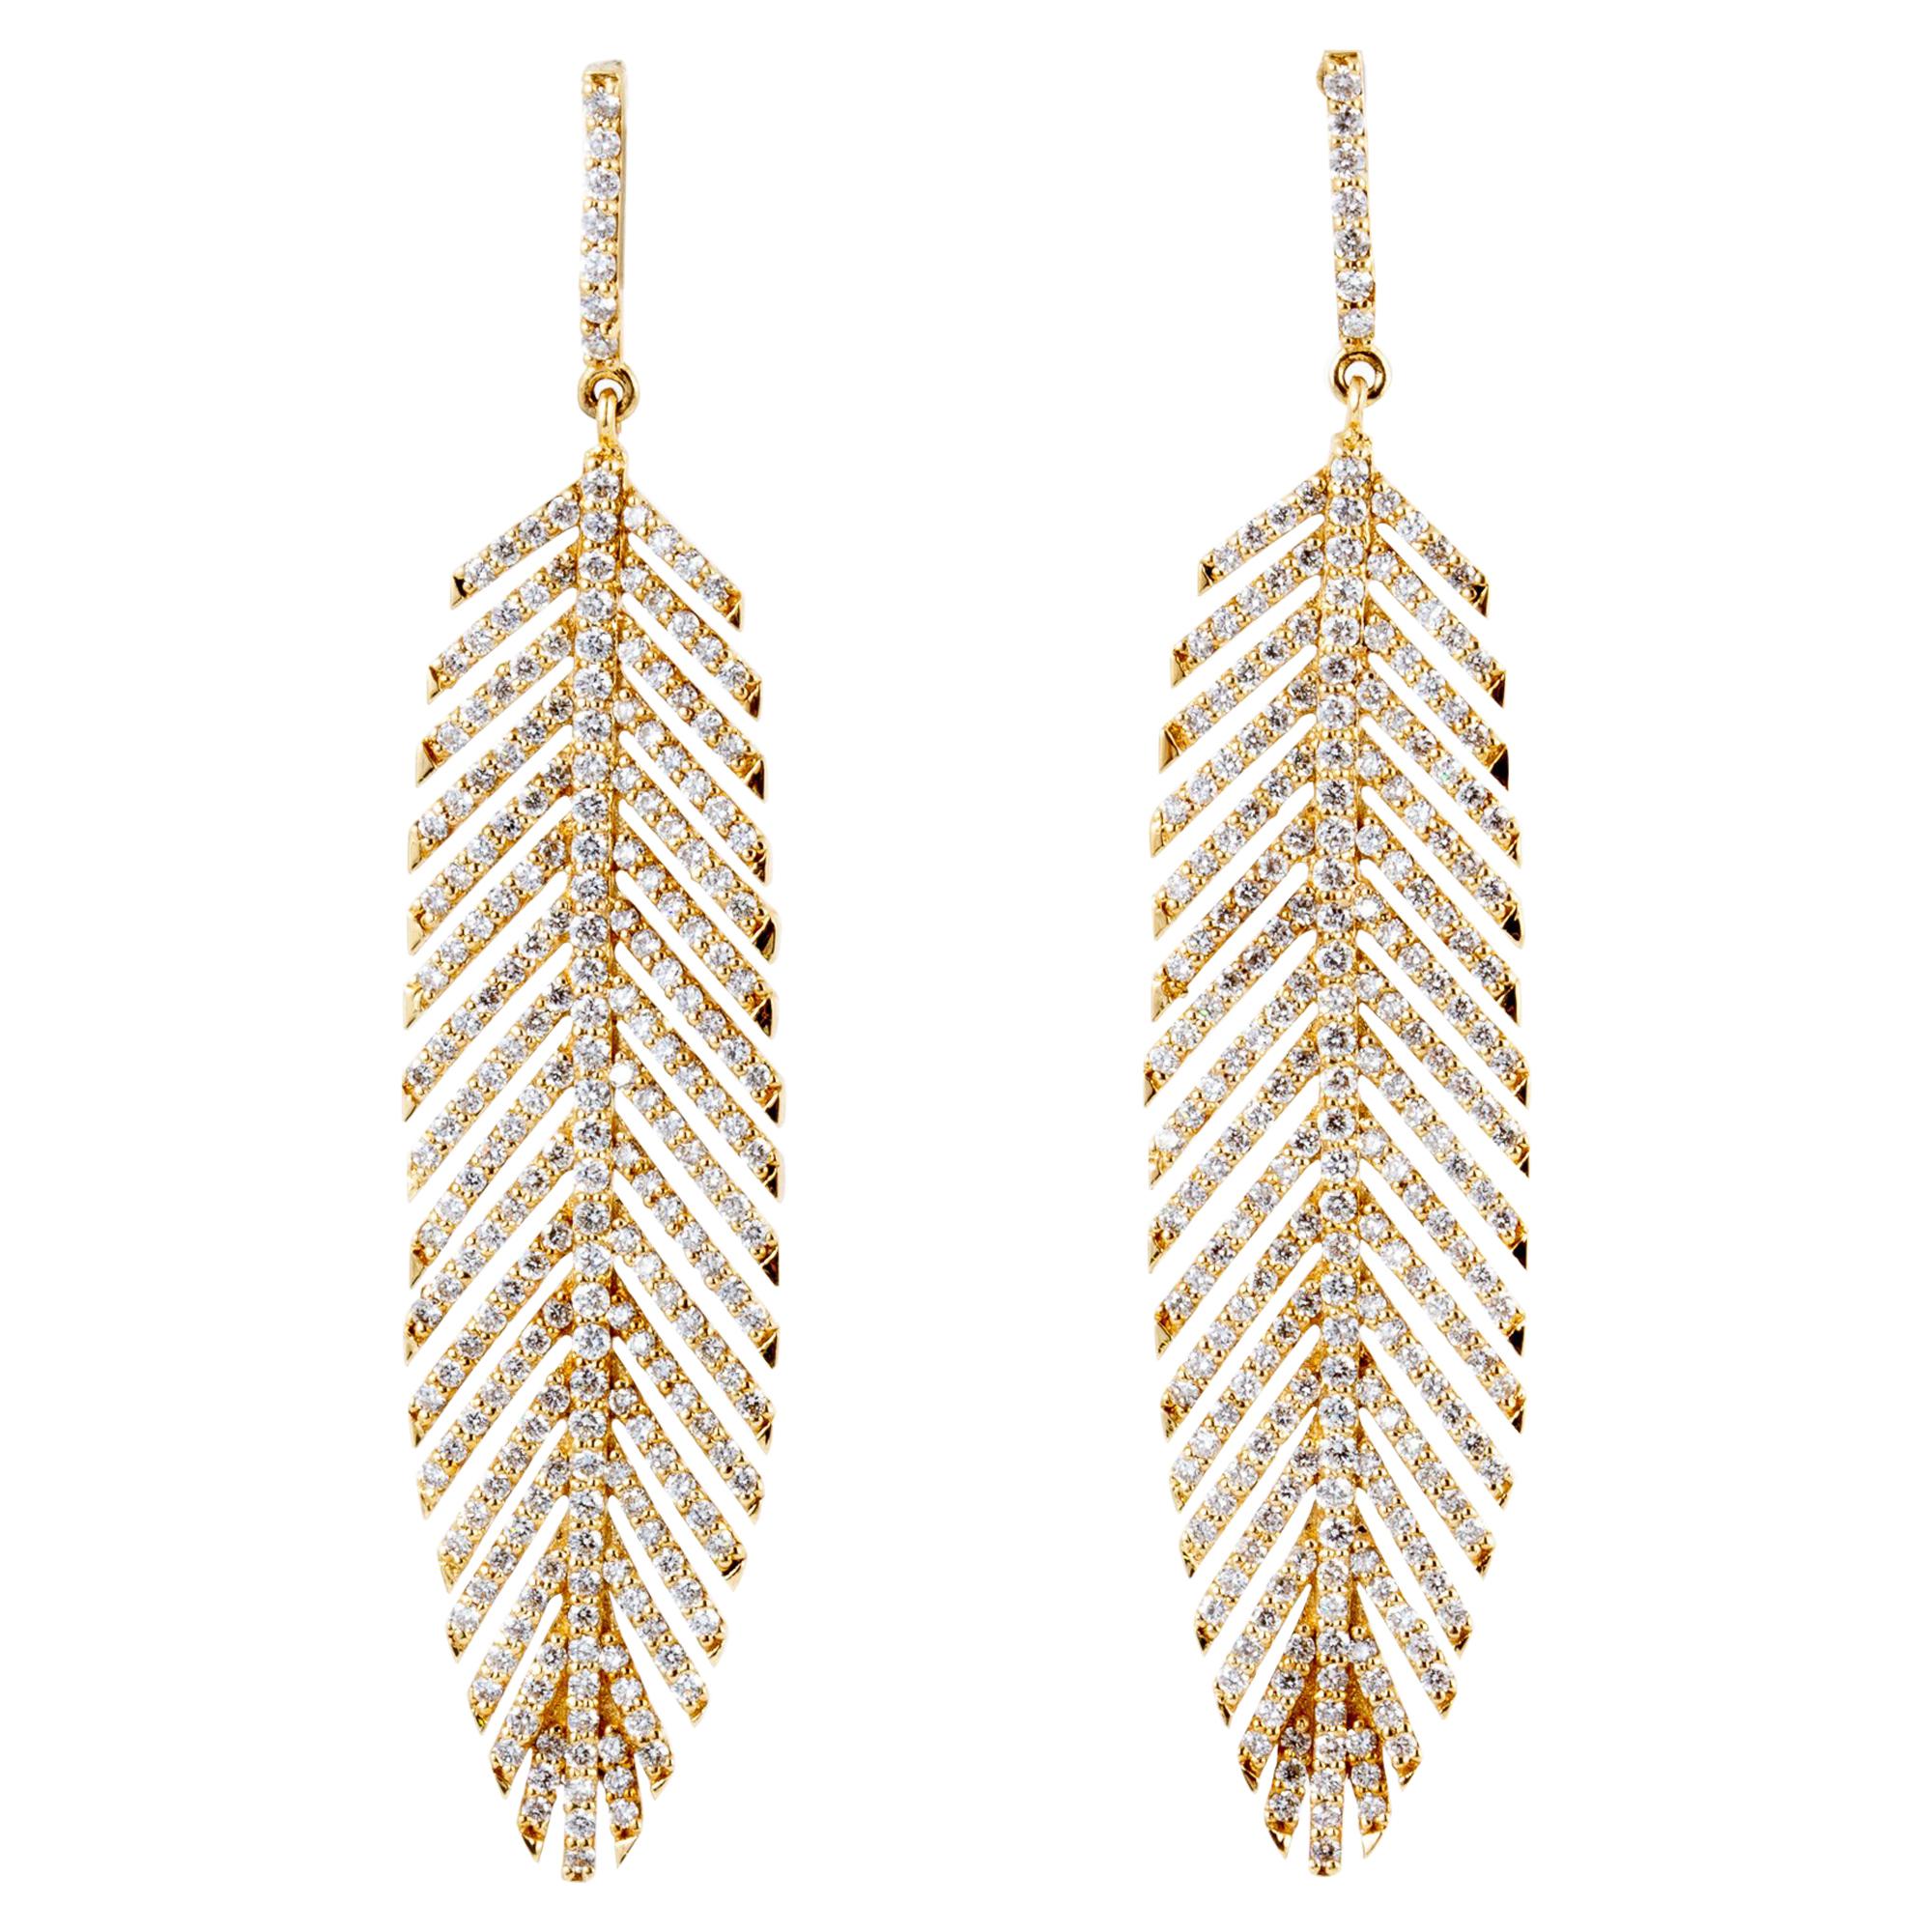 18 Carat Handcrafted Feather Earrings with 3 Carat of Diamonds For Sale